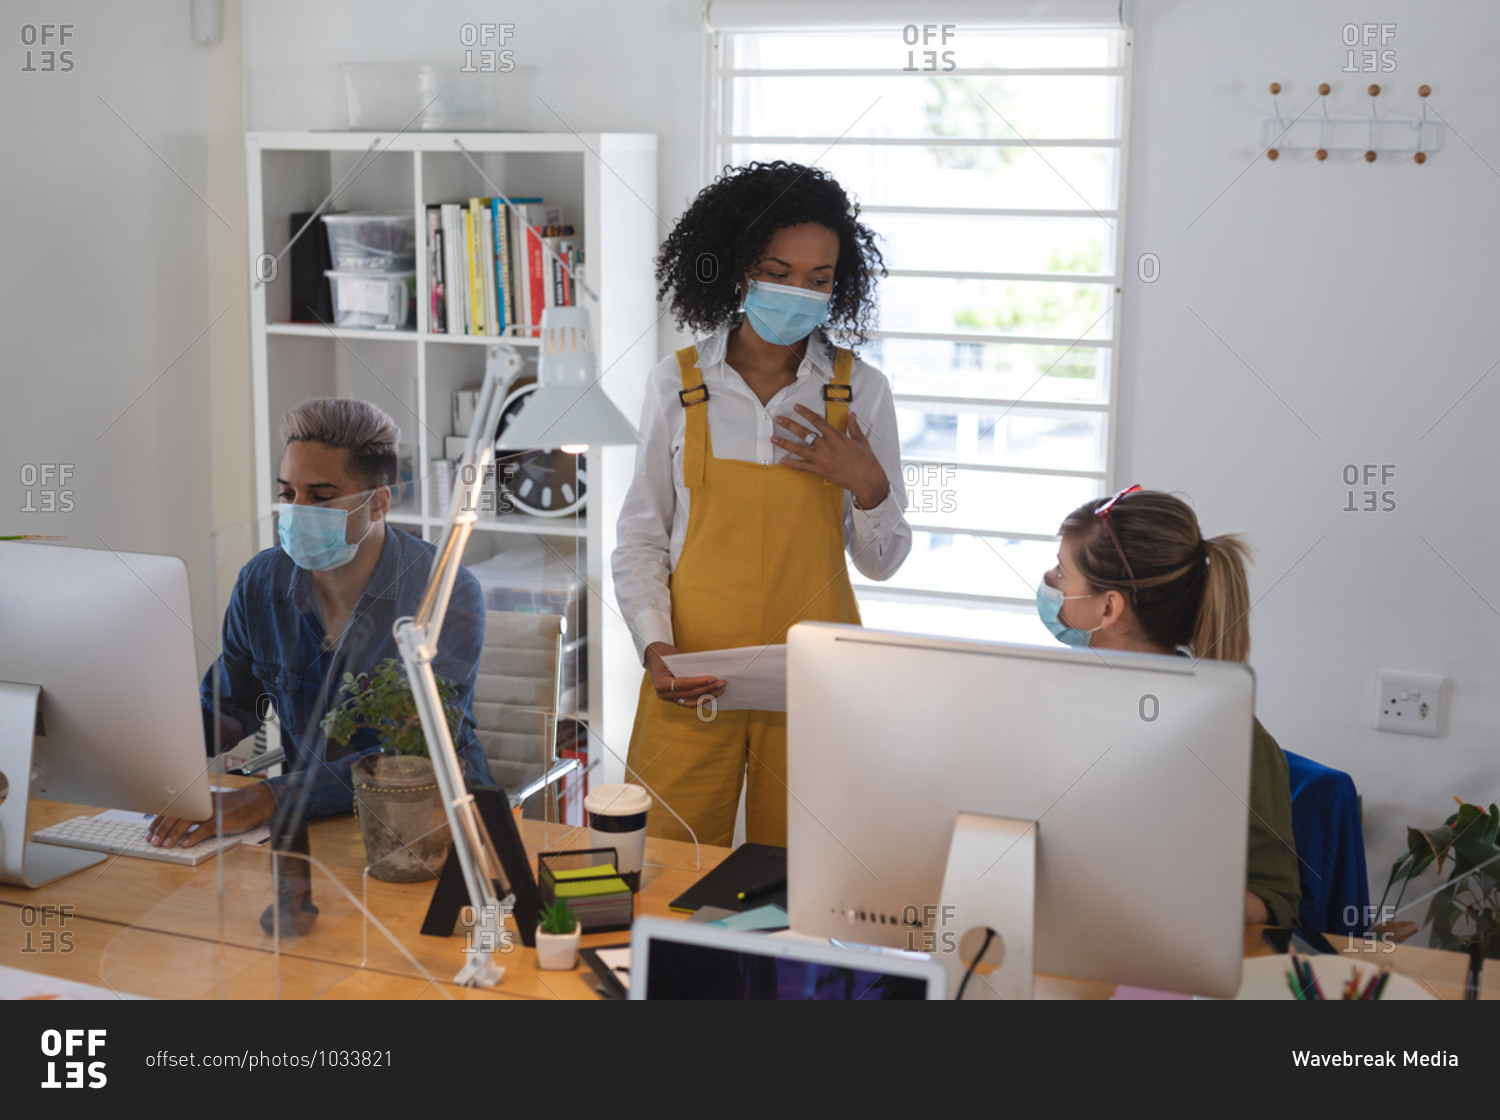 Mixed race and Caucasian female creative business colleague talking in office wearing face masks, male colleague in background. Health and hygiene in workplace during Coronavirus Covid 19 pandemic.